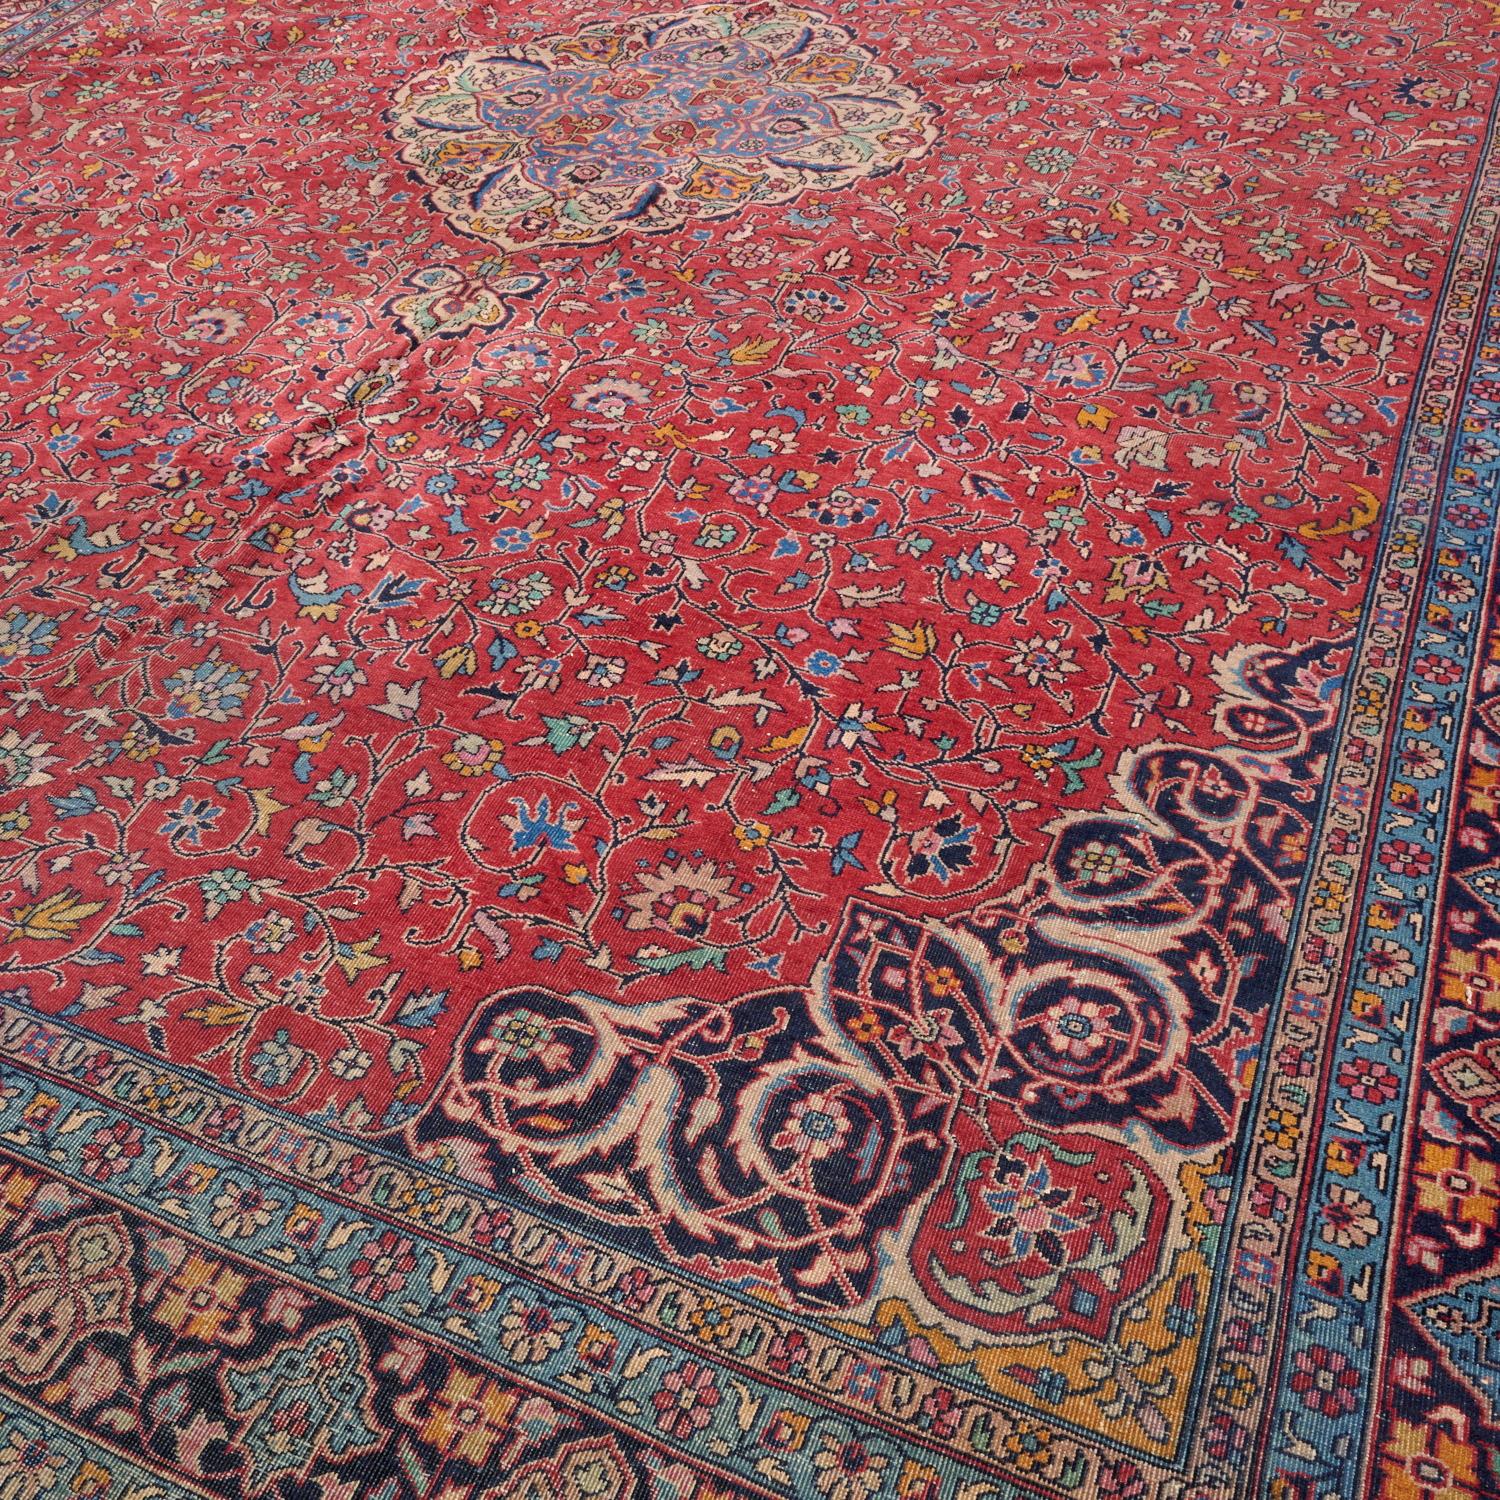 Cotton Early 20th C. Room Sized Kashan Carpet, Scrolling Floral Vines on a Red Ground For Sale